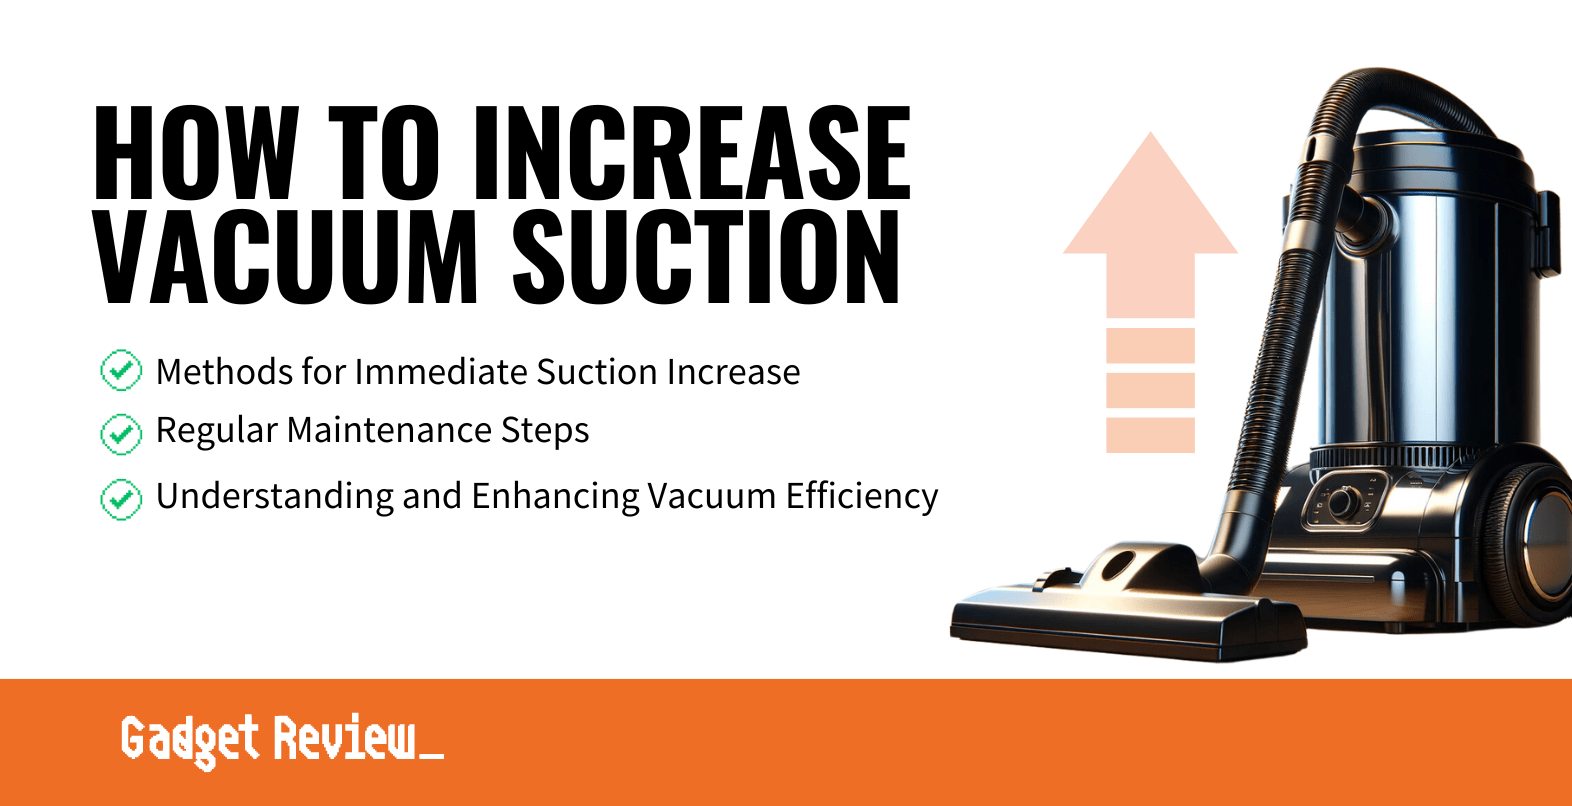 How to Increase Vacuum Suction